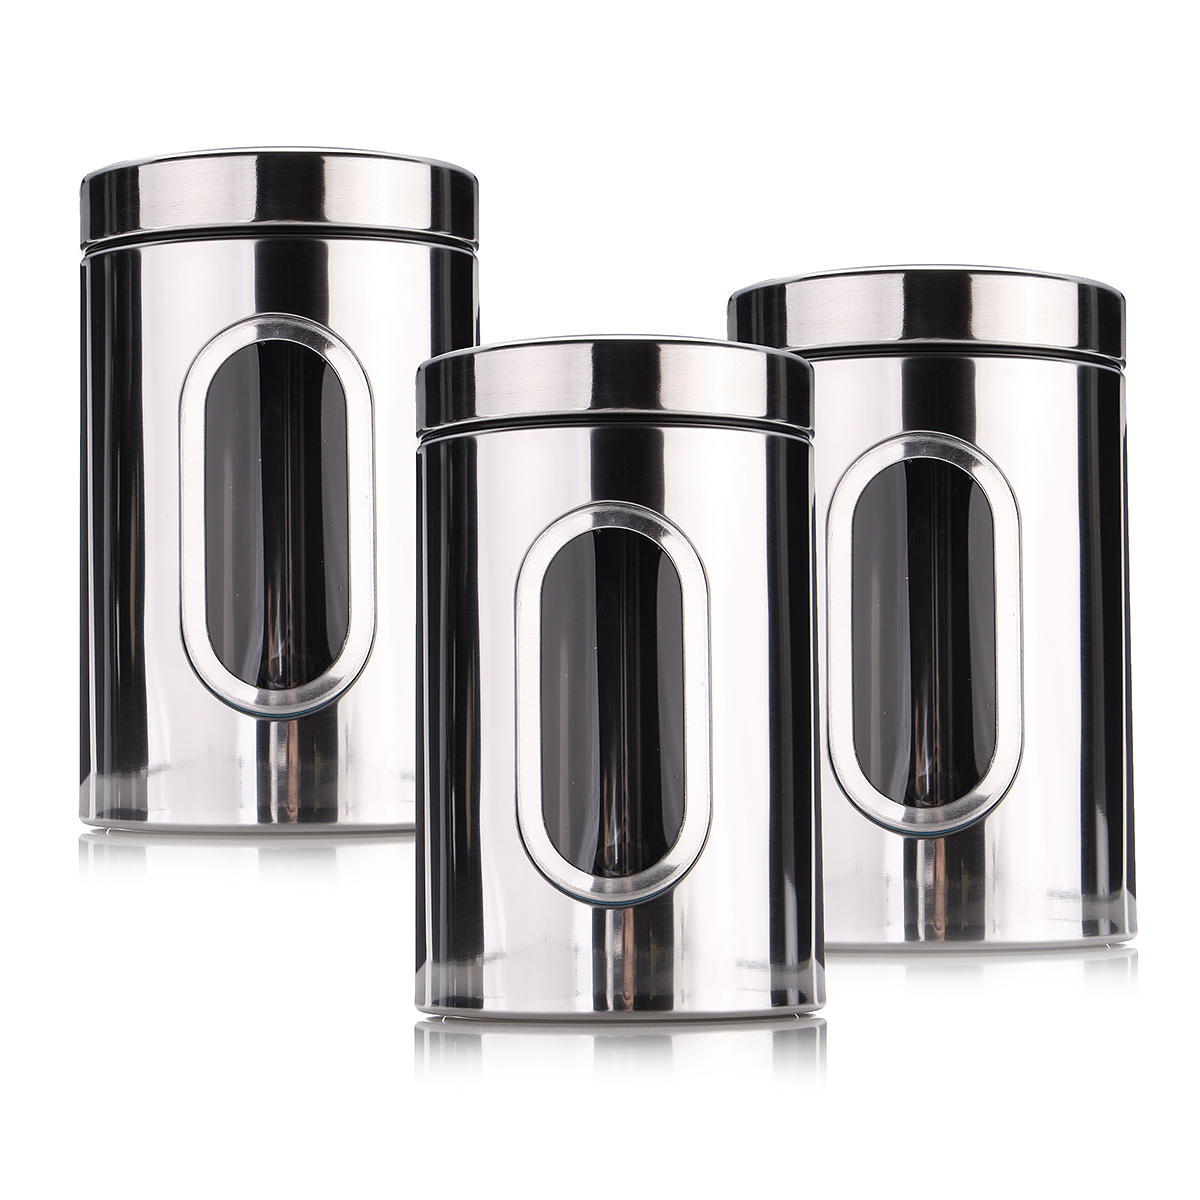 3pcs stainless steel tea coffee sugar canisters kitchen storage Stainless Steel Tea Coffee Sugar Canisters